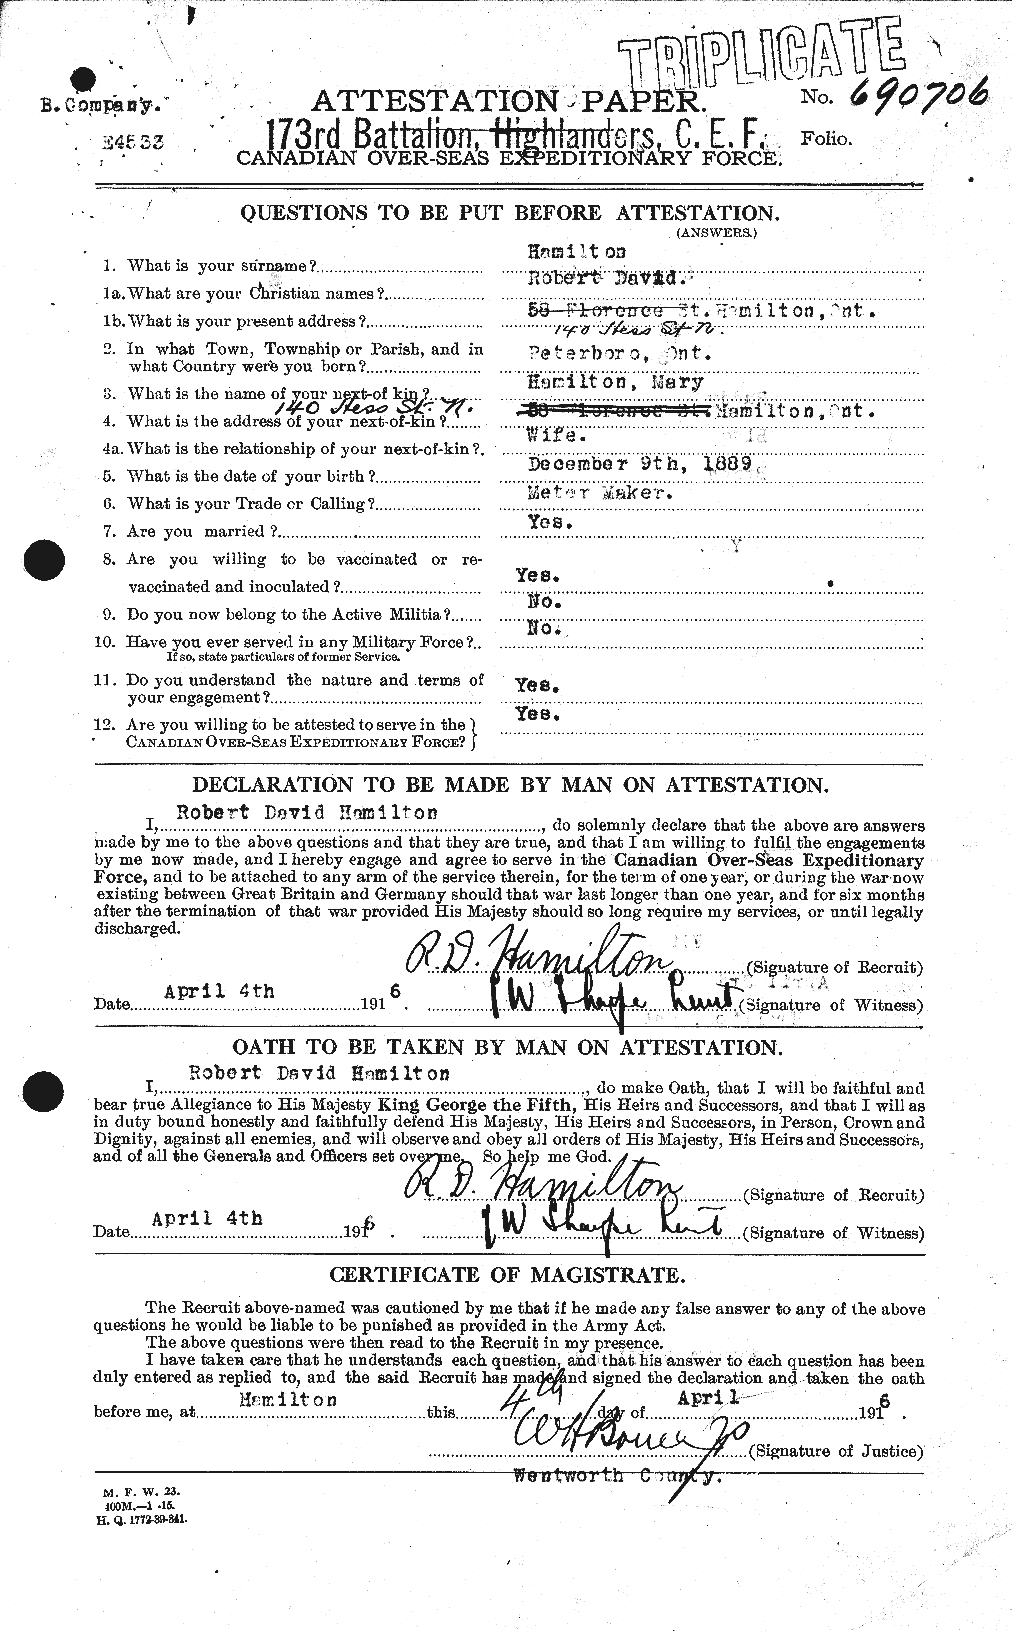 Personnel Records of the First World War - CEF 373254a